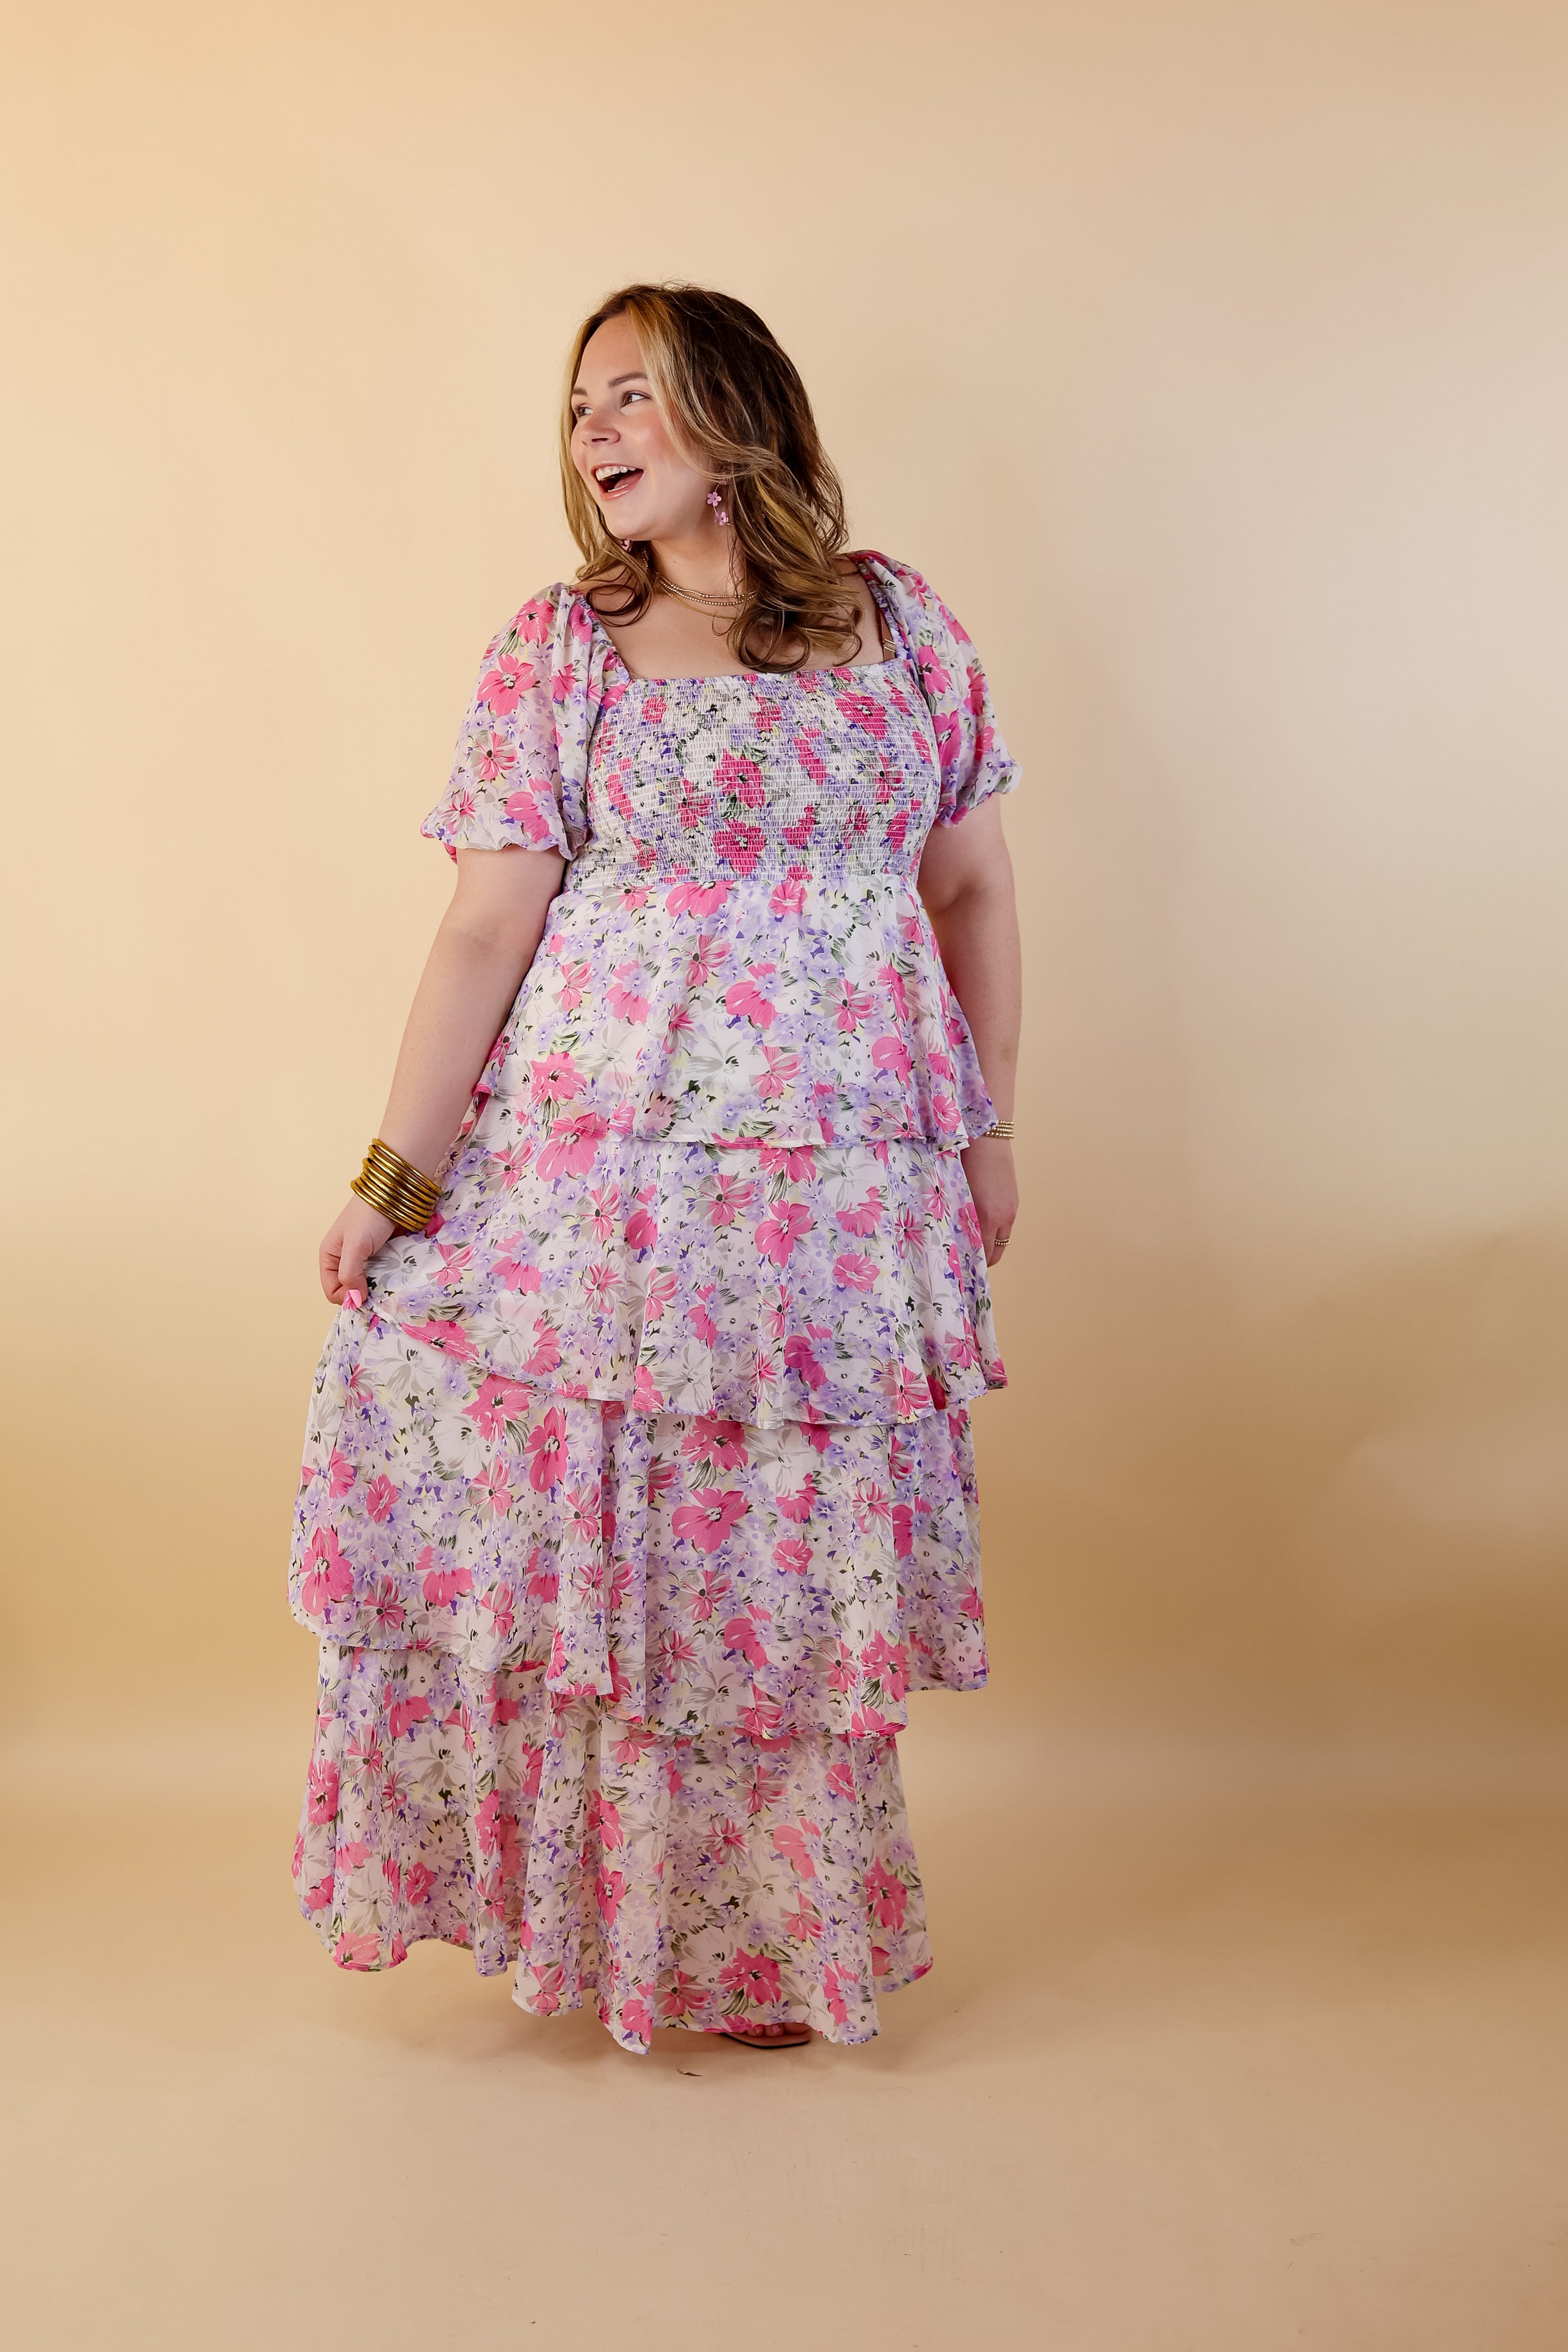 Fun Feeling Floral Tiered Maxi Dress with Smocked Balloon Sleeves in Pink Mix - Giddy Up Glamour Boutique